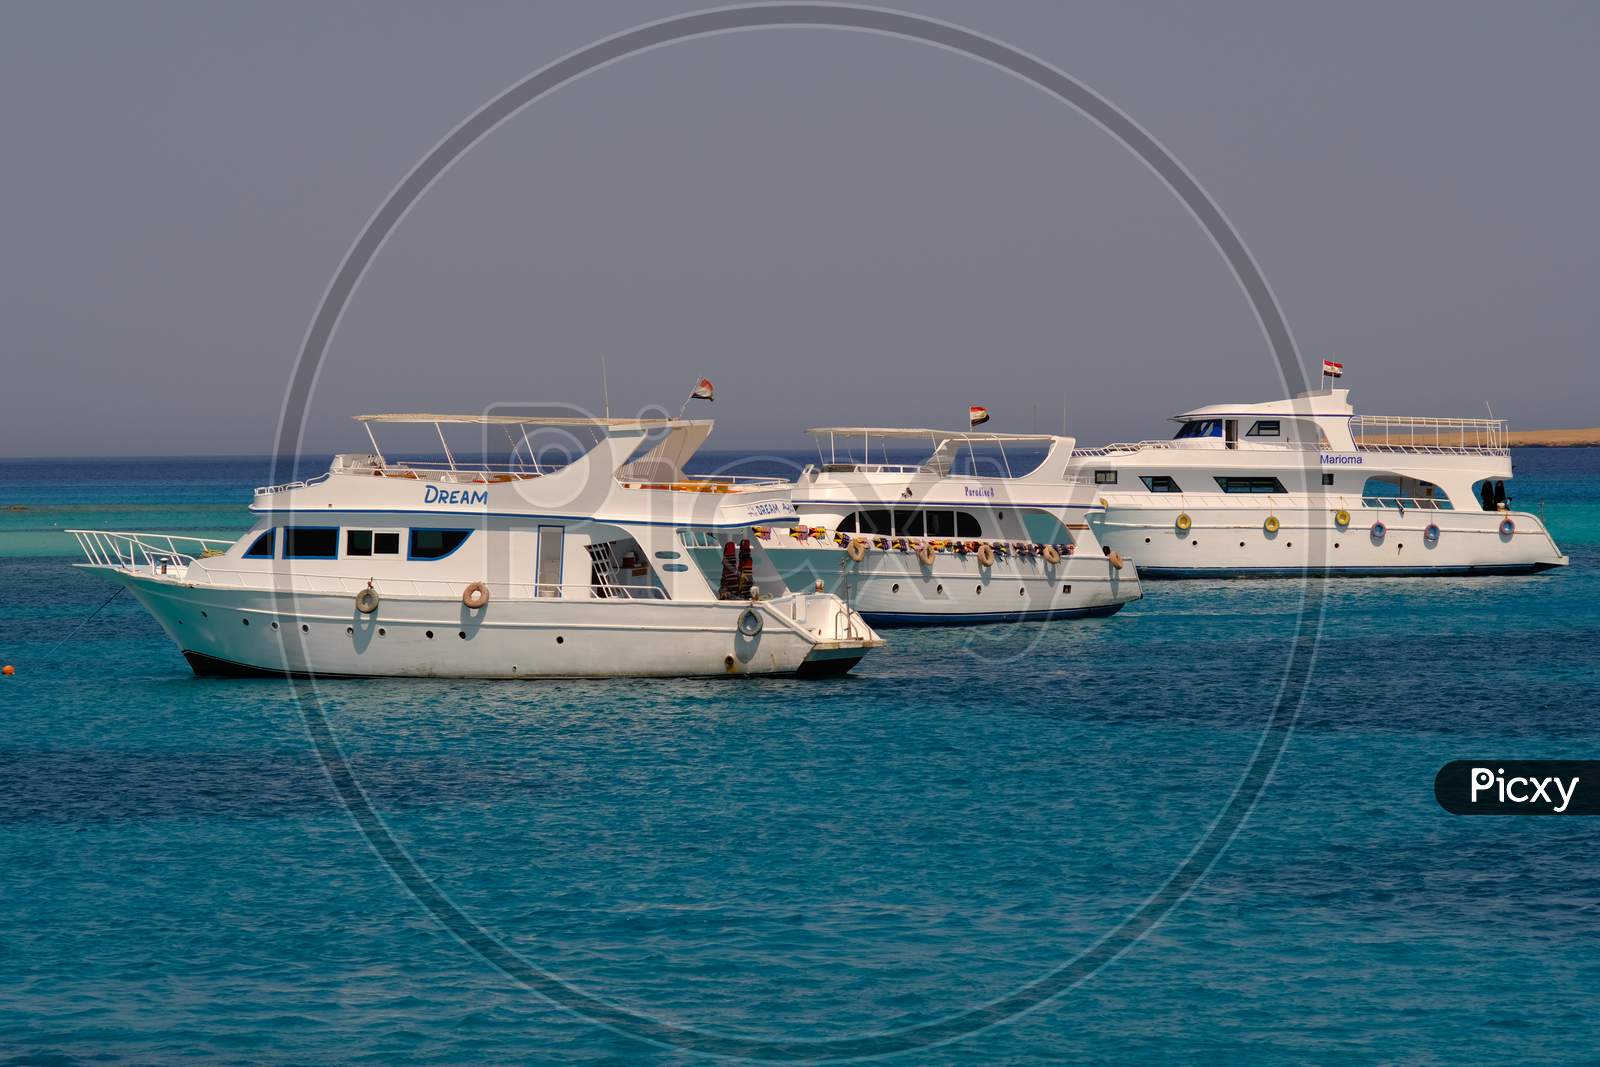 Boats Taking Tourists For Snorkeling And Scuba Diving Near Giftun Island In Red Sea, Hurghada, Egypt